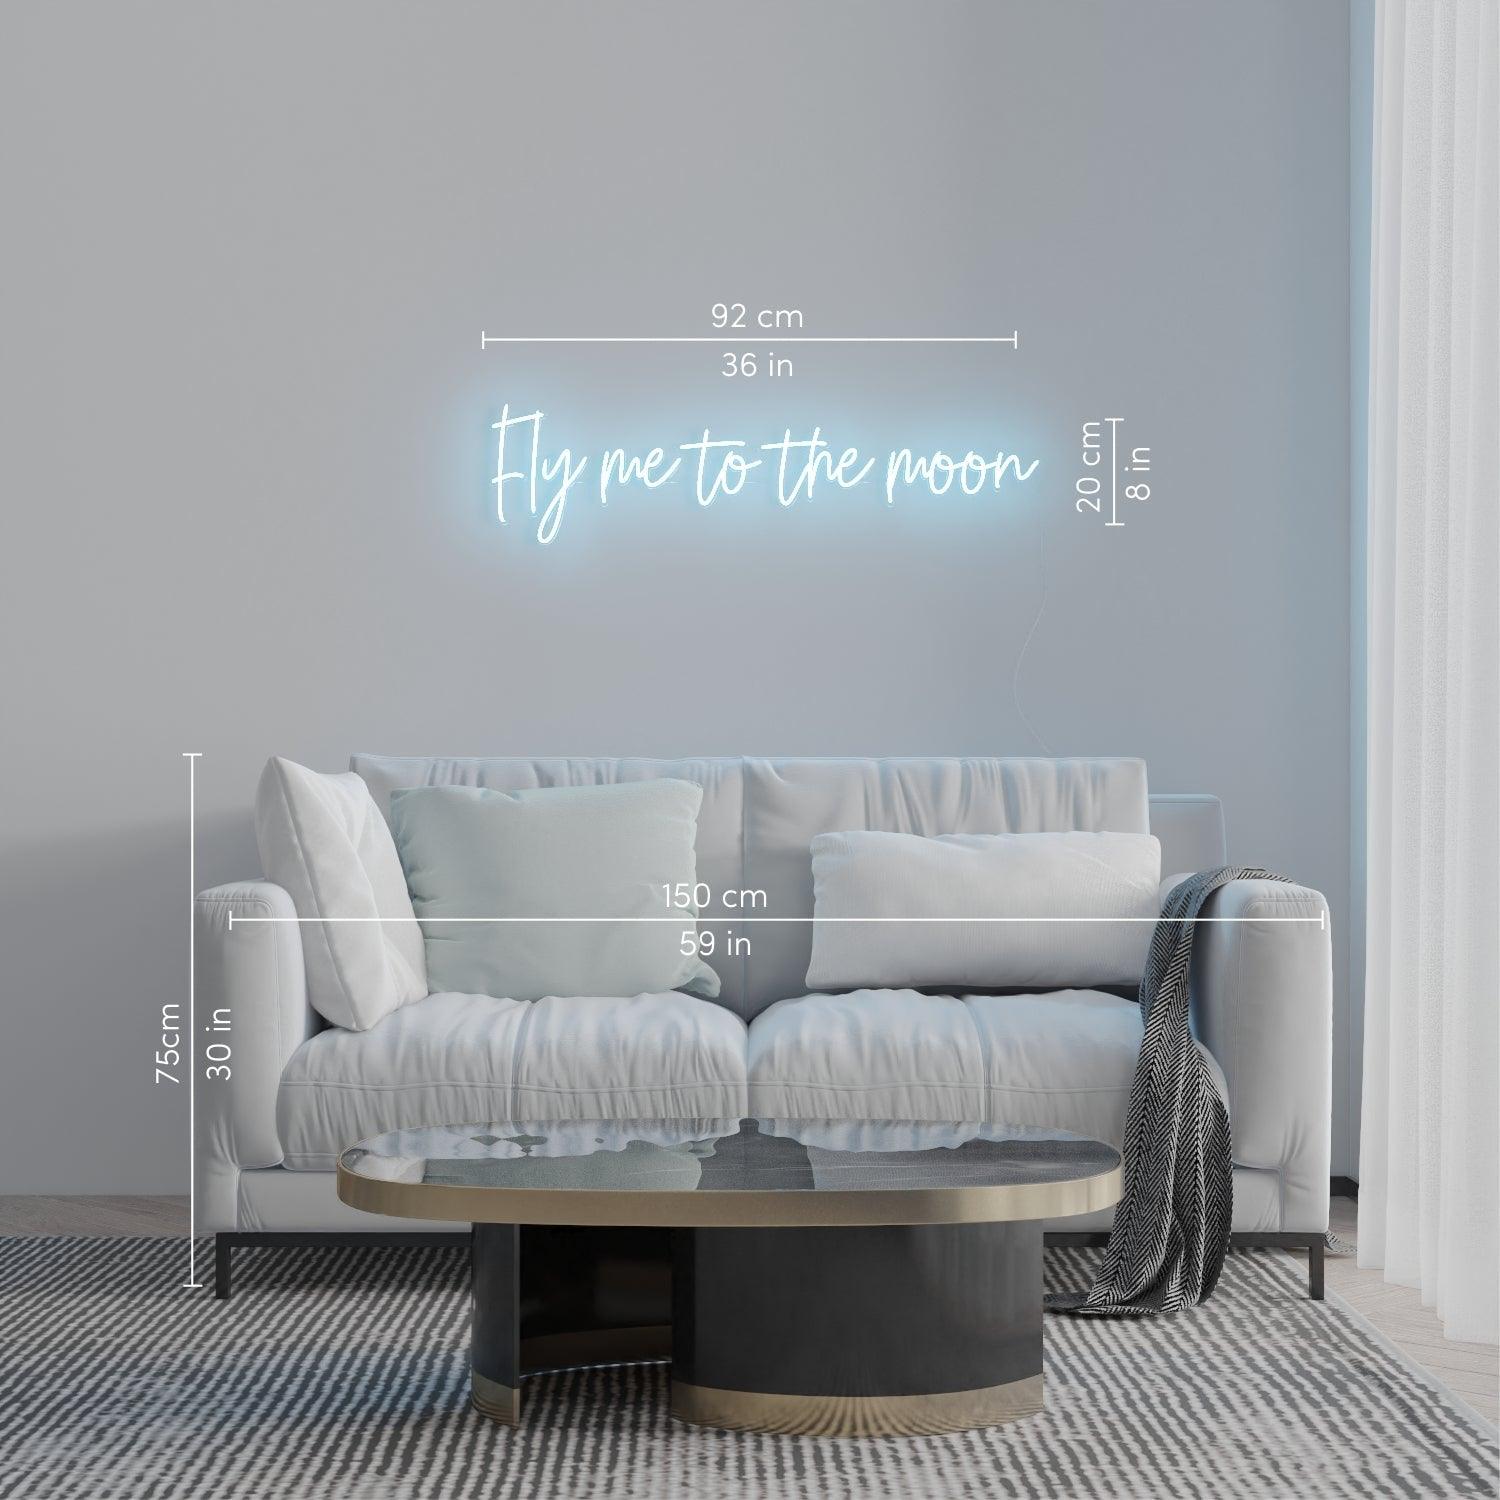 Fly me to the moon - Neon Tabela - Neonbir